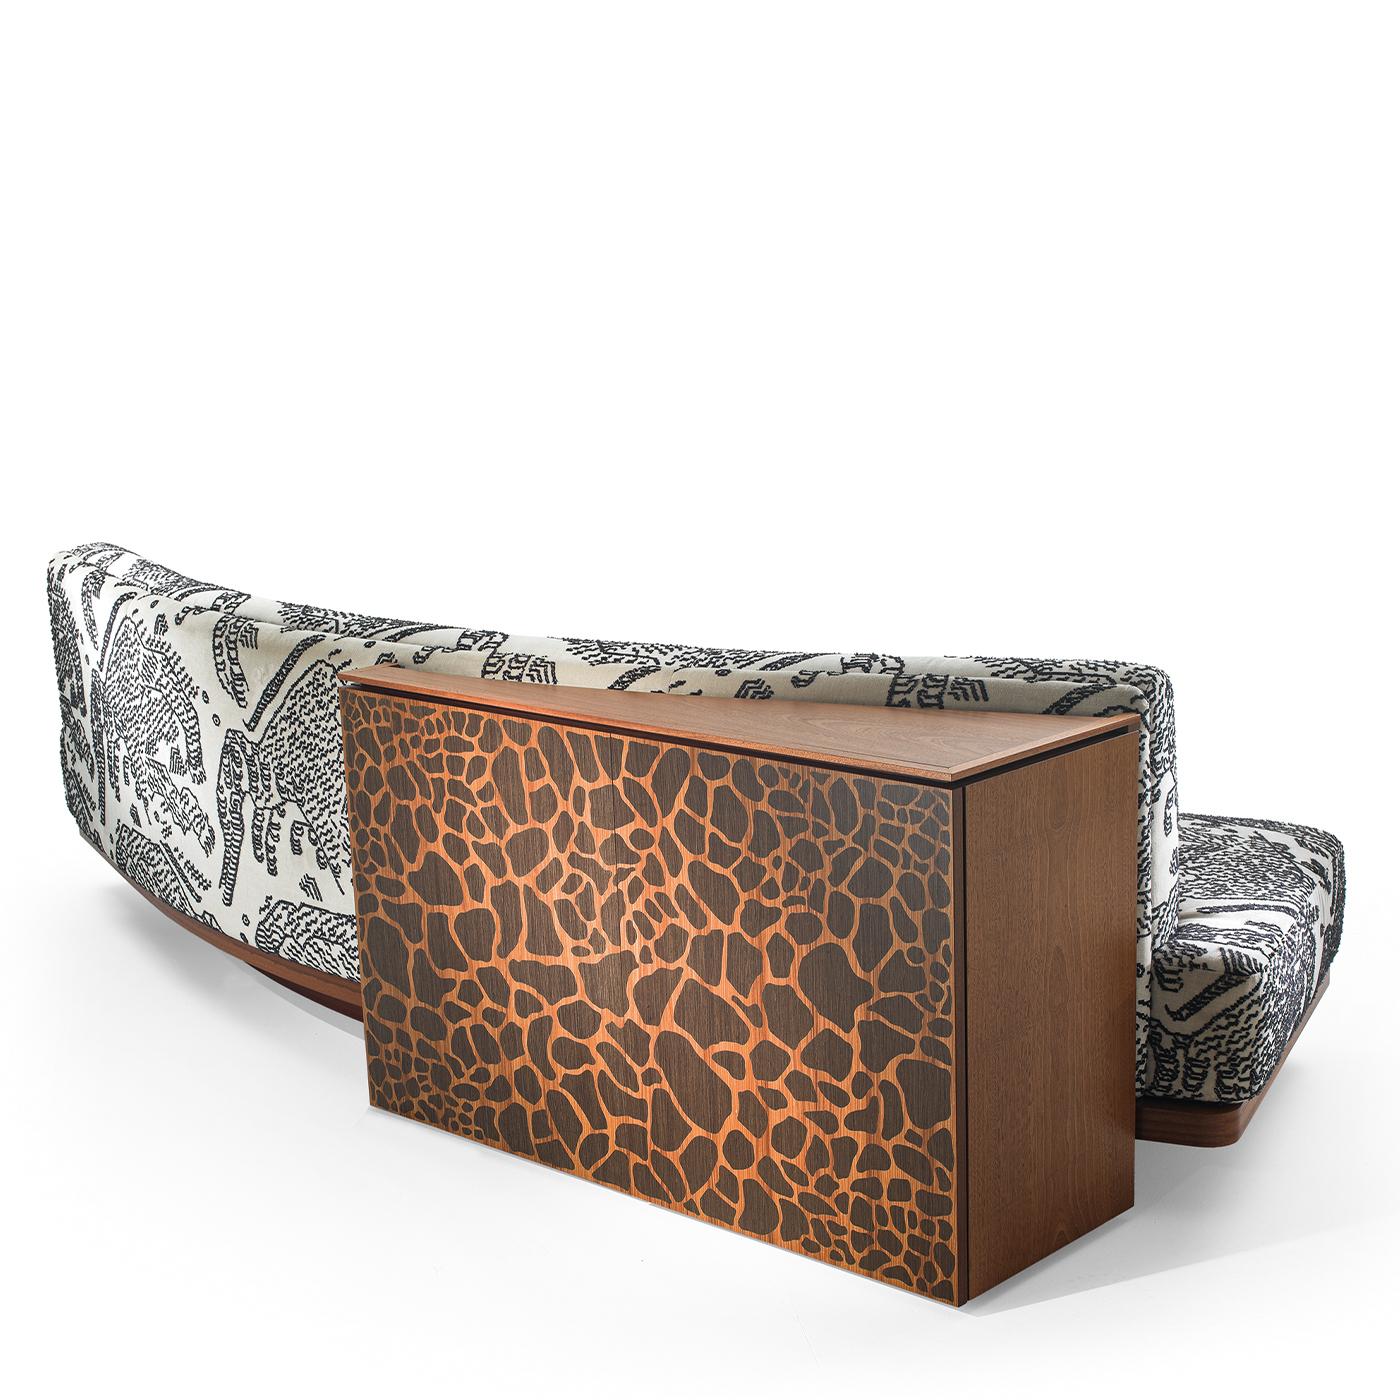 A striking multifunctional design, this sofa is distinguished by a back cabinet with two doors, enriched with a giraffe-striped inlay work on the mahogany plywood structure. Upholstered with a tiger mountain fabric, it boasts a slightly curved and